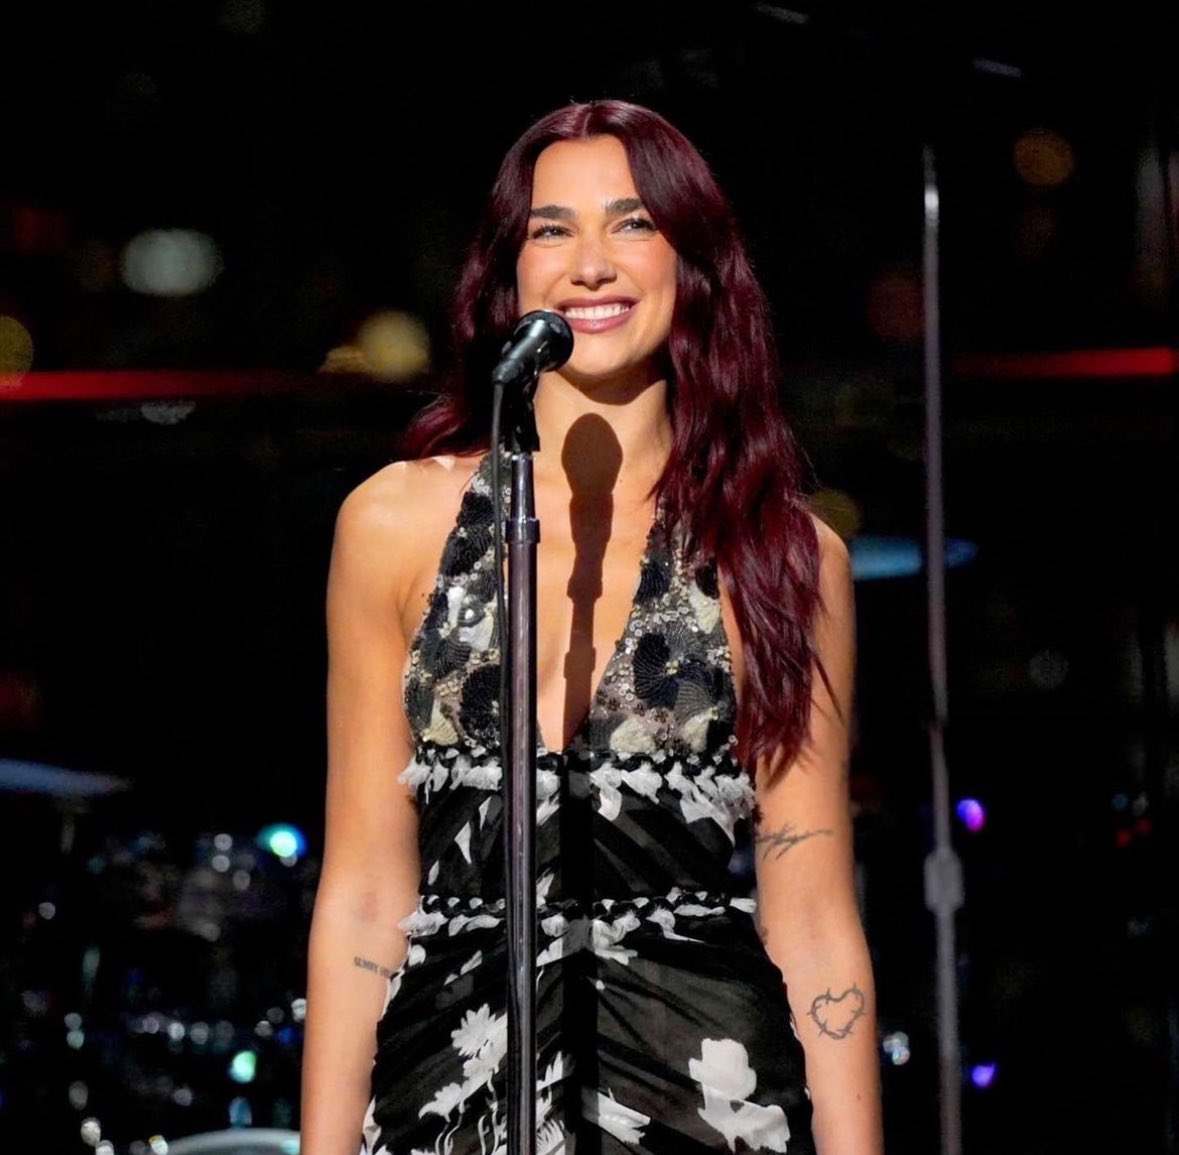 🌠✨ DAZZLING DIVA: Unseen Snaps Surface of Dua Lipa's Time100 Spectacle! Beauty, Grace, and Star-Power Unmatched - Peek into Her Incredible Gala Night #Dazzling  #Time100Gala #TikTokViral 

©️ via Time and via goddesslipaa